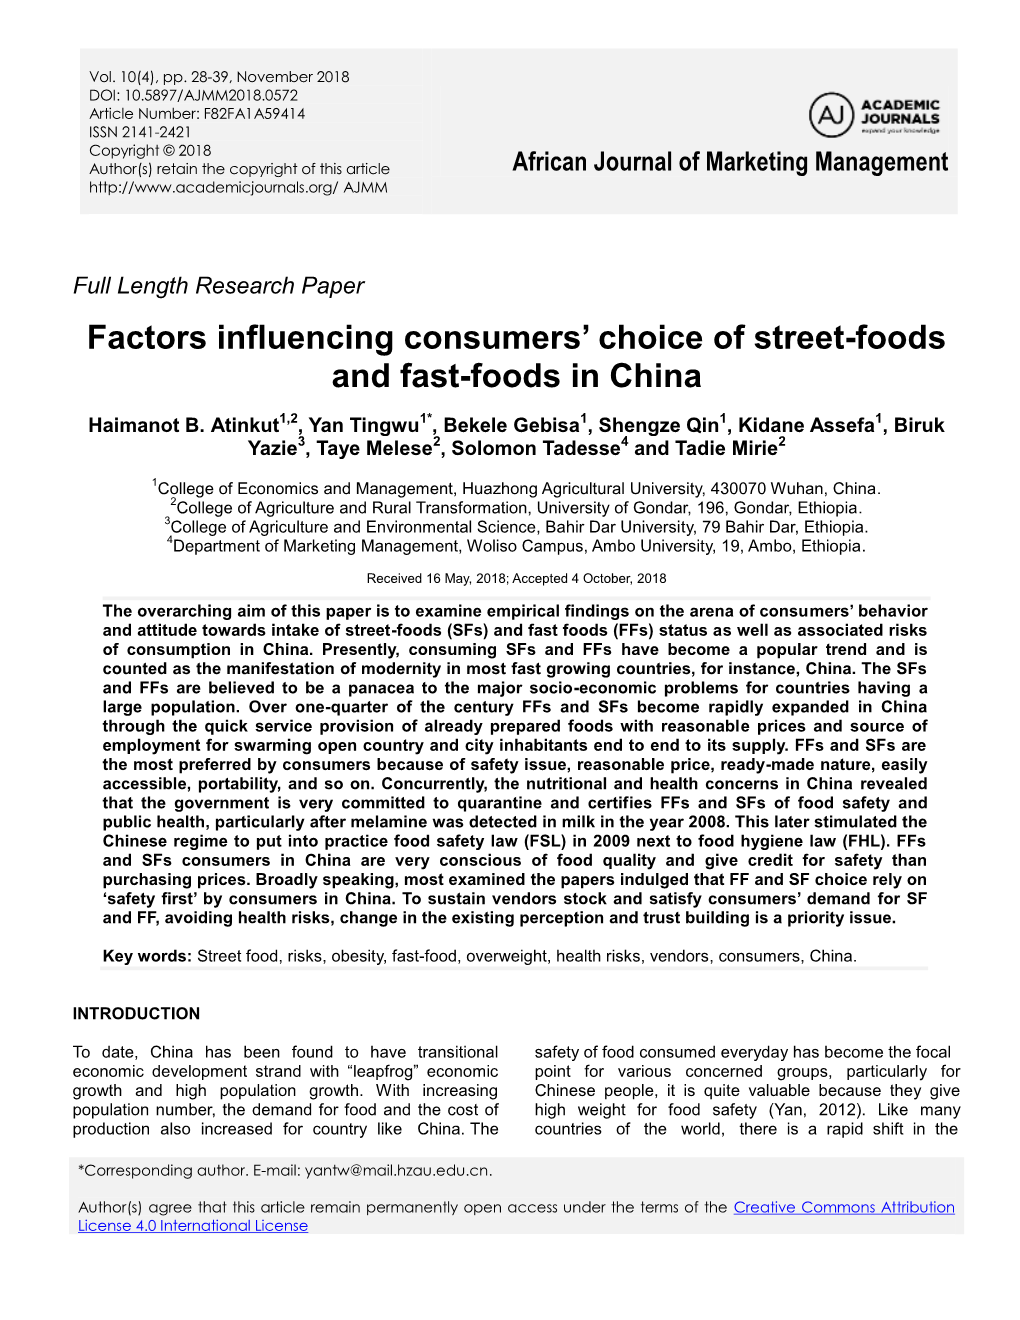 Factors Influencing Consumers' Choice of Street-Foods and Fast-Foods In